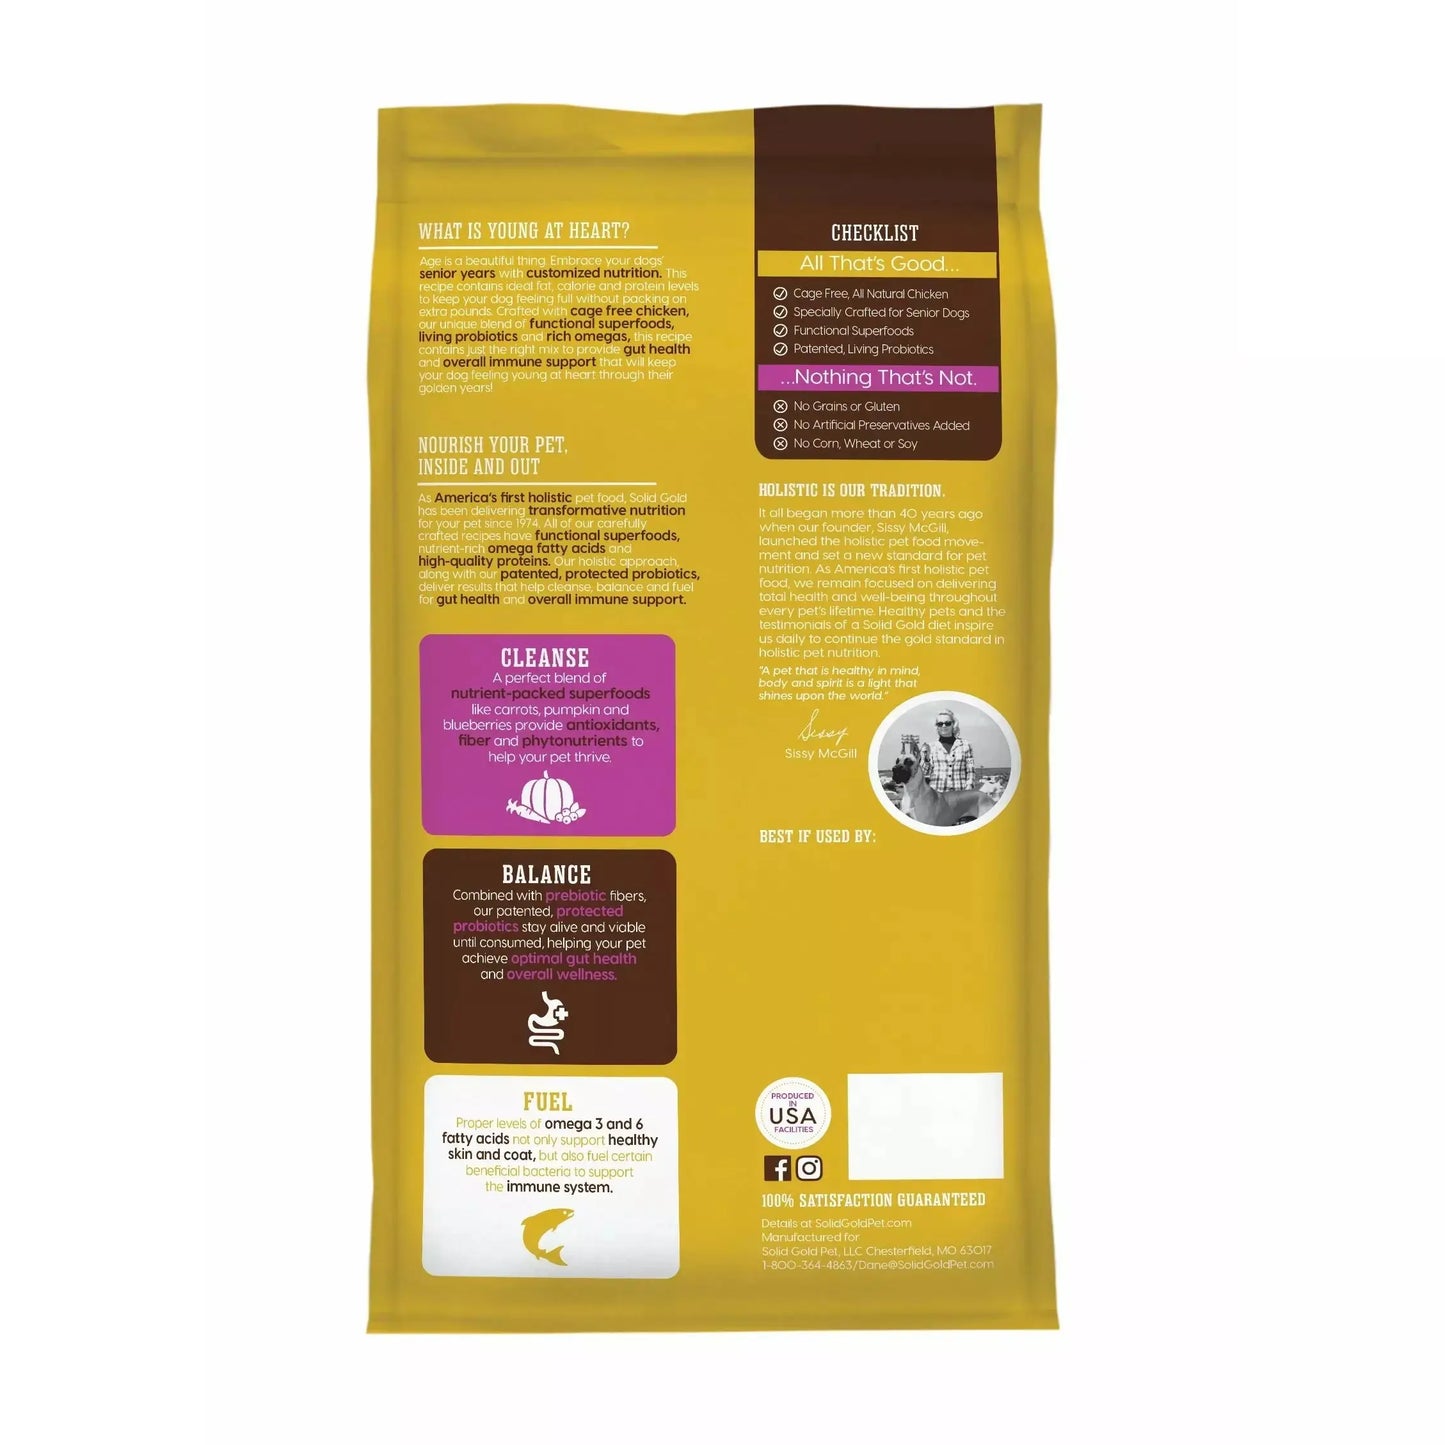 Solid Gold® Young at Heart Grain Free Chicken, Sweet Potato & Spinach Recipe Dog Food Solid Gold